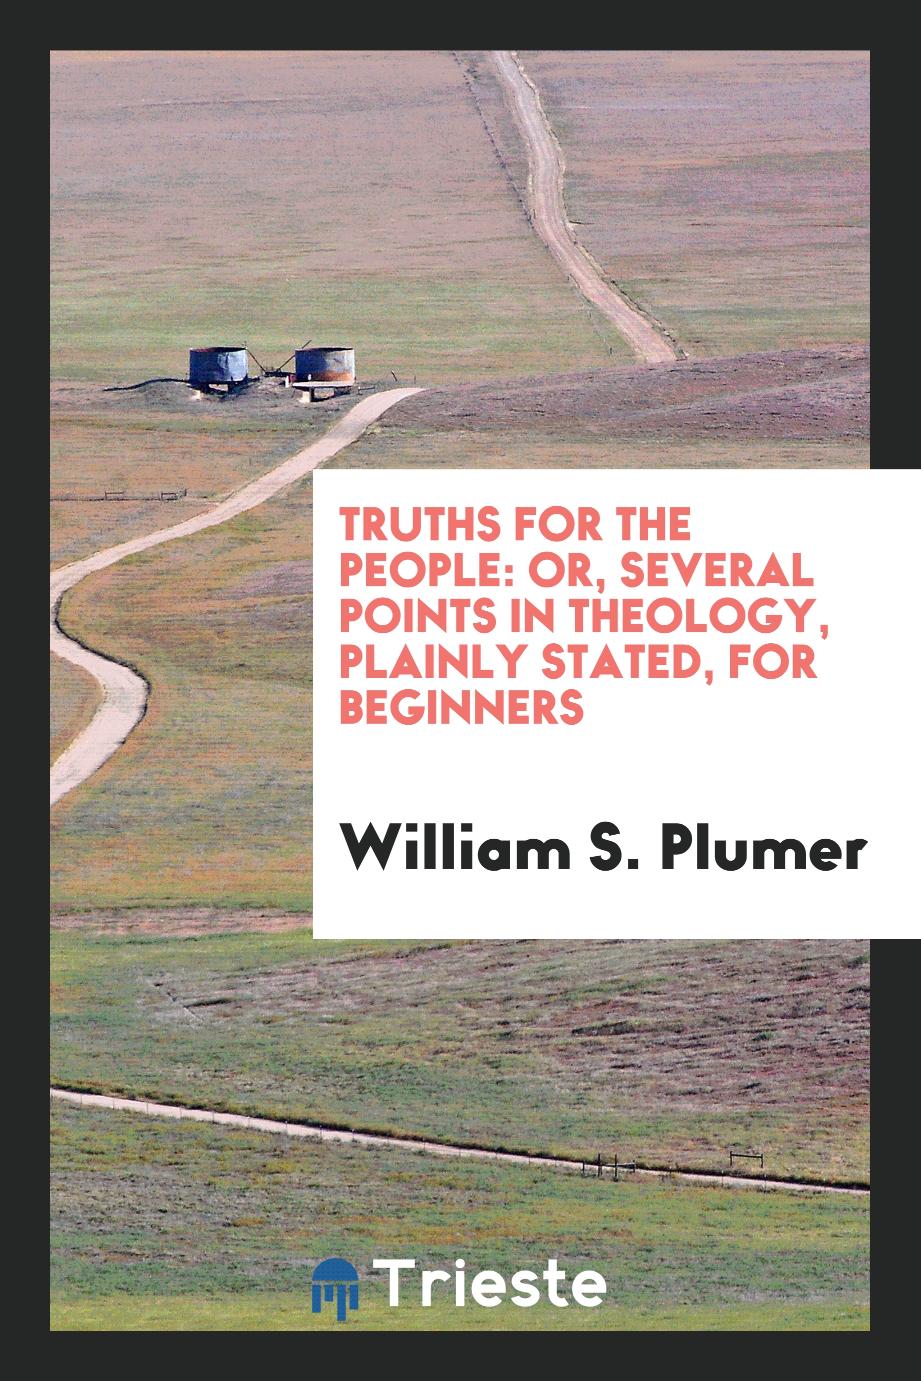 Truths for the people: or, Several points in theology, plainly stated, for beginners